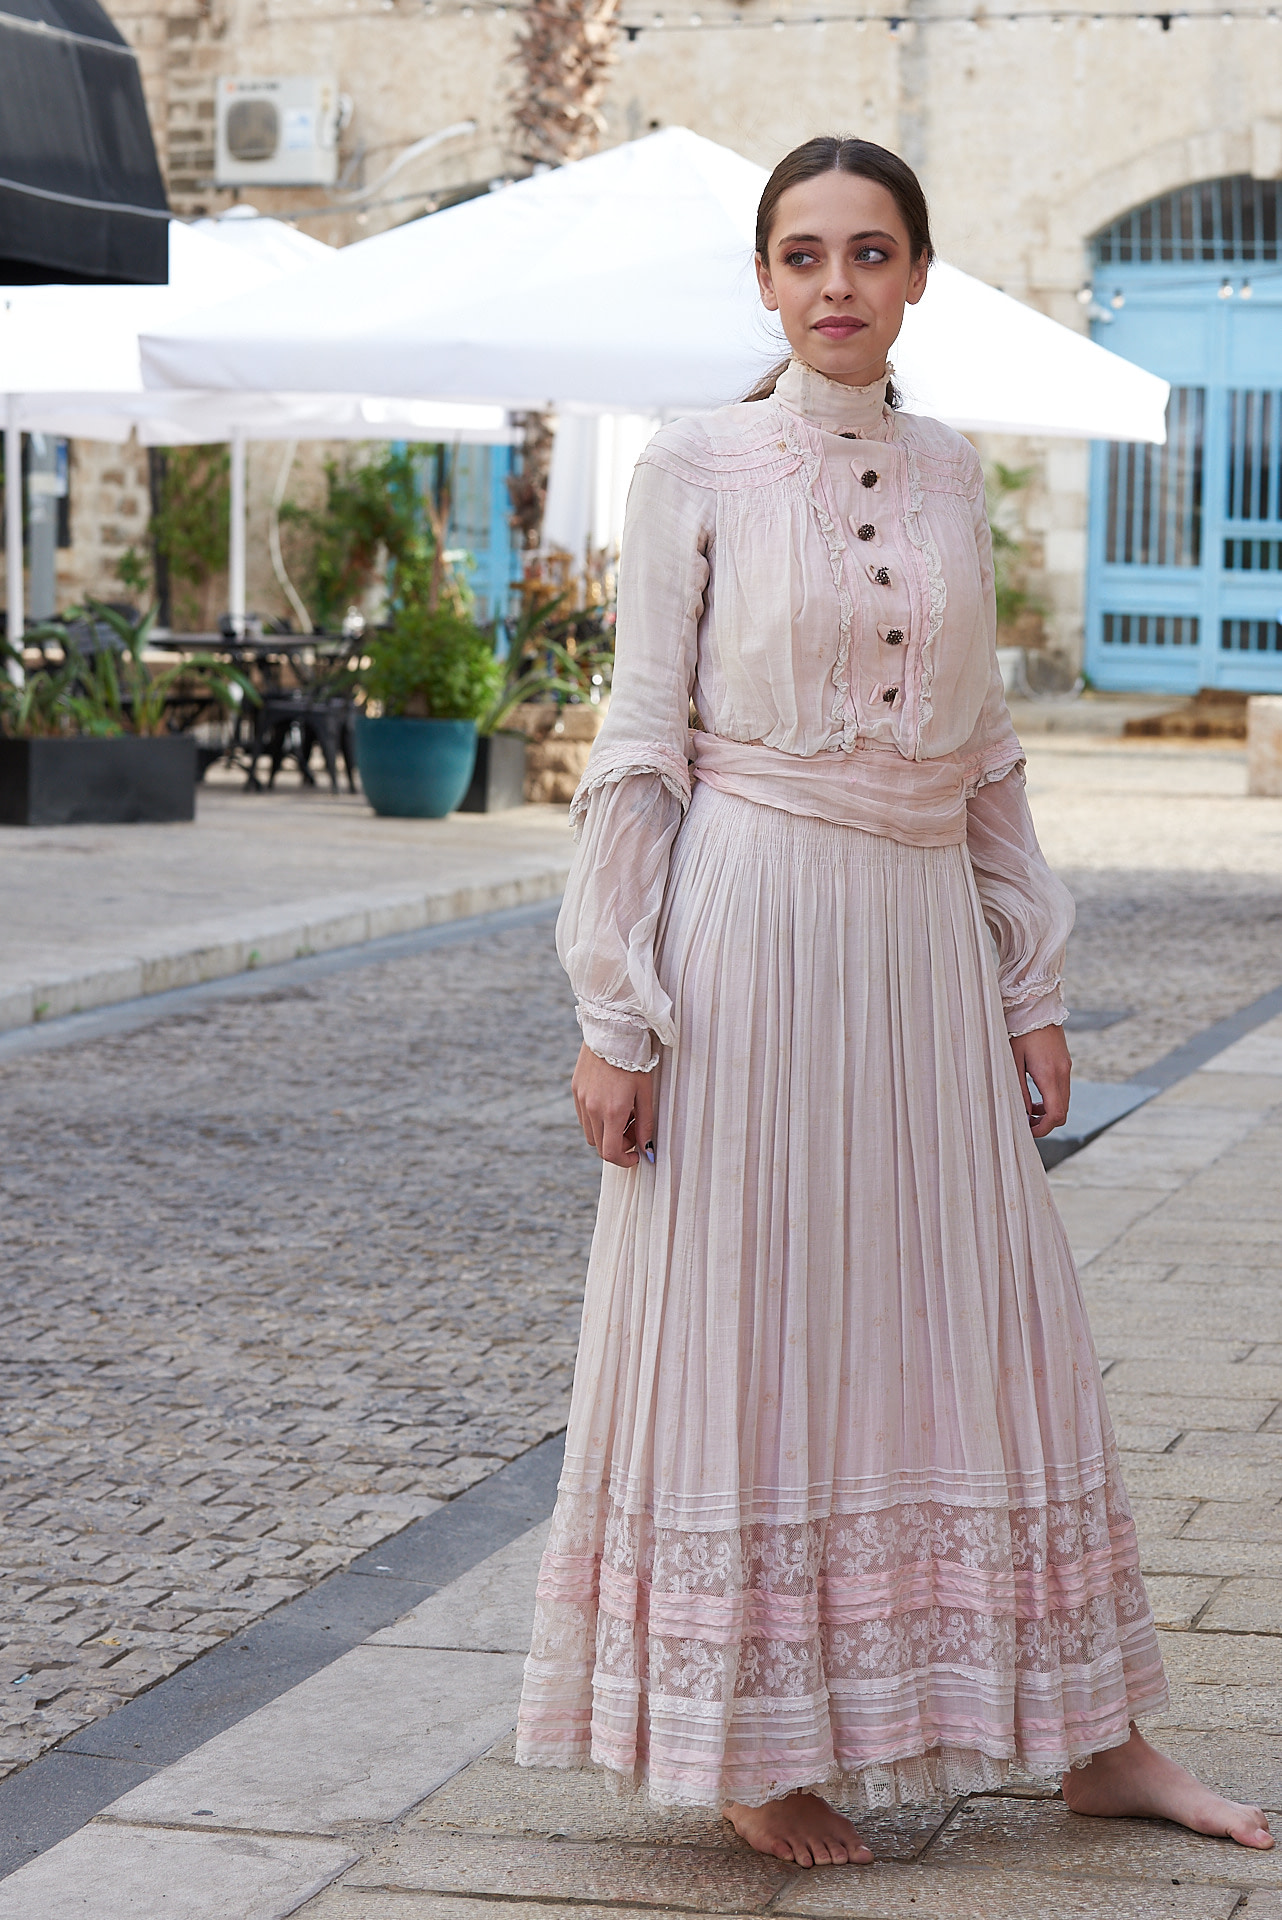 The Meaning Behind Vintage Women's Pink Wedding Dresses with Lace Sleeves  in the 1850s